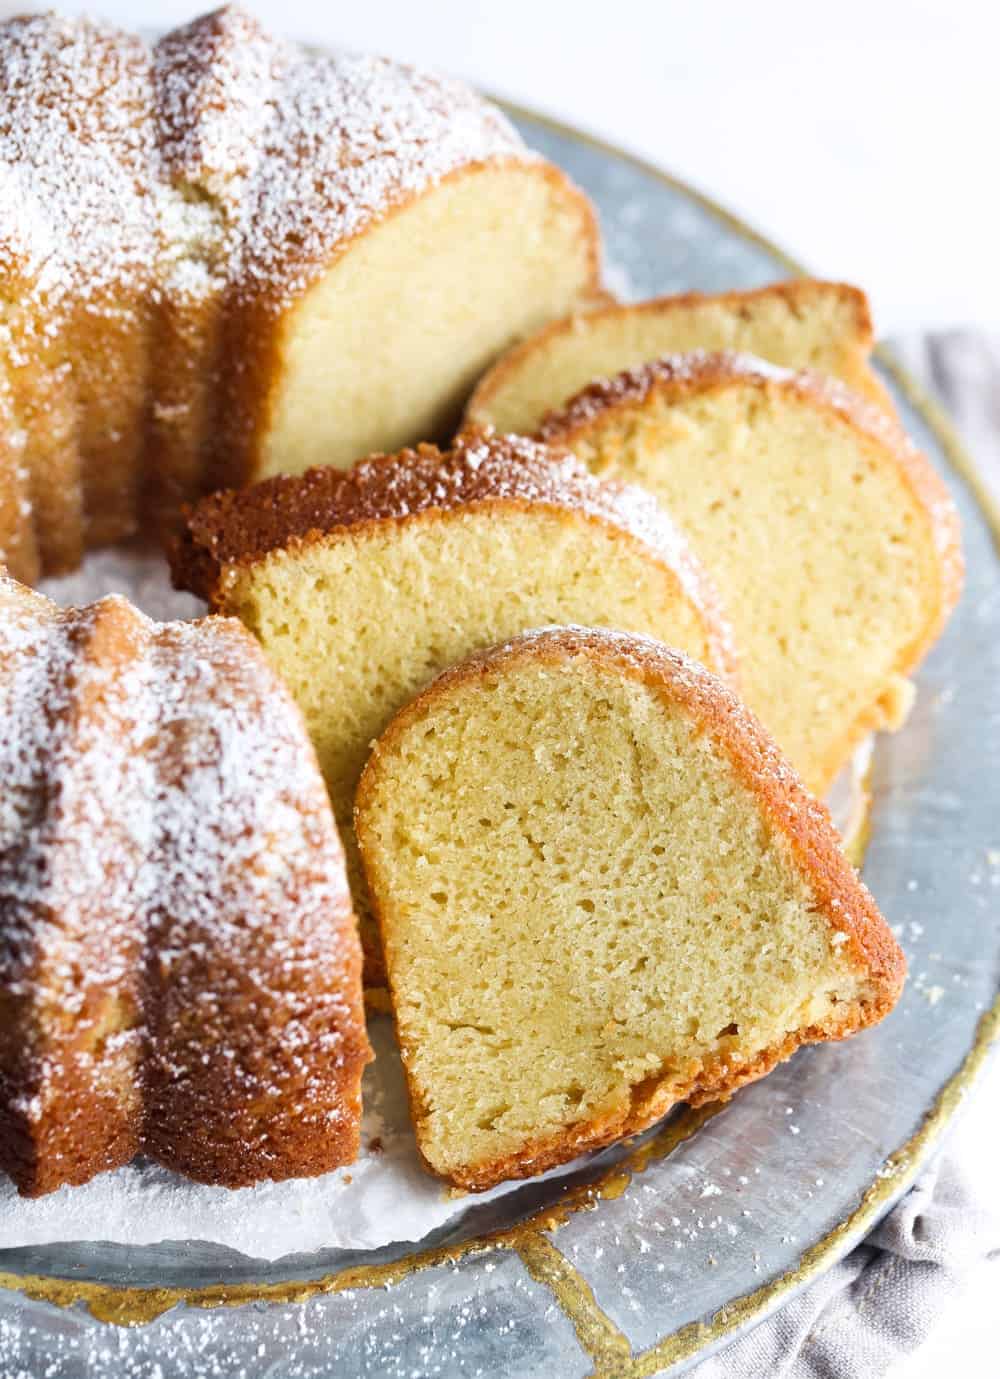 The Best Sour Cream Pound Cake Recipe | Cookies & Cups